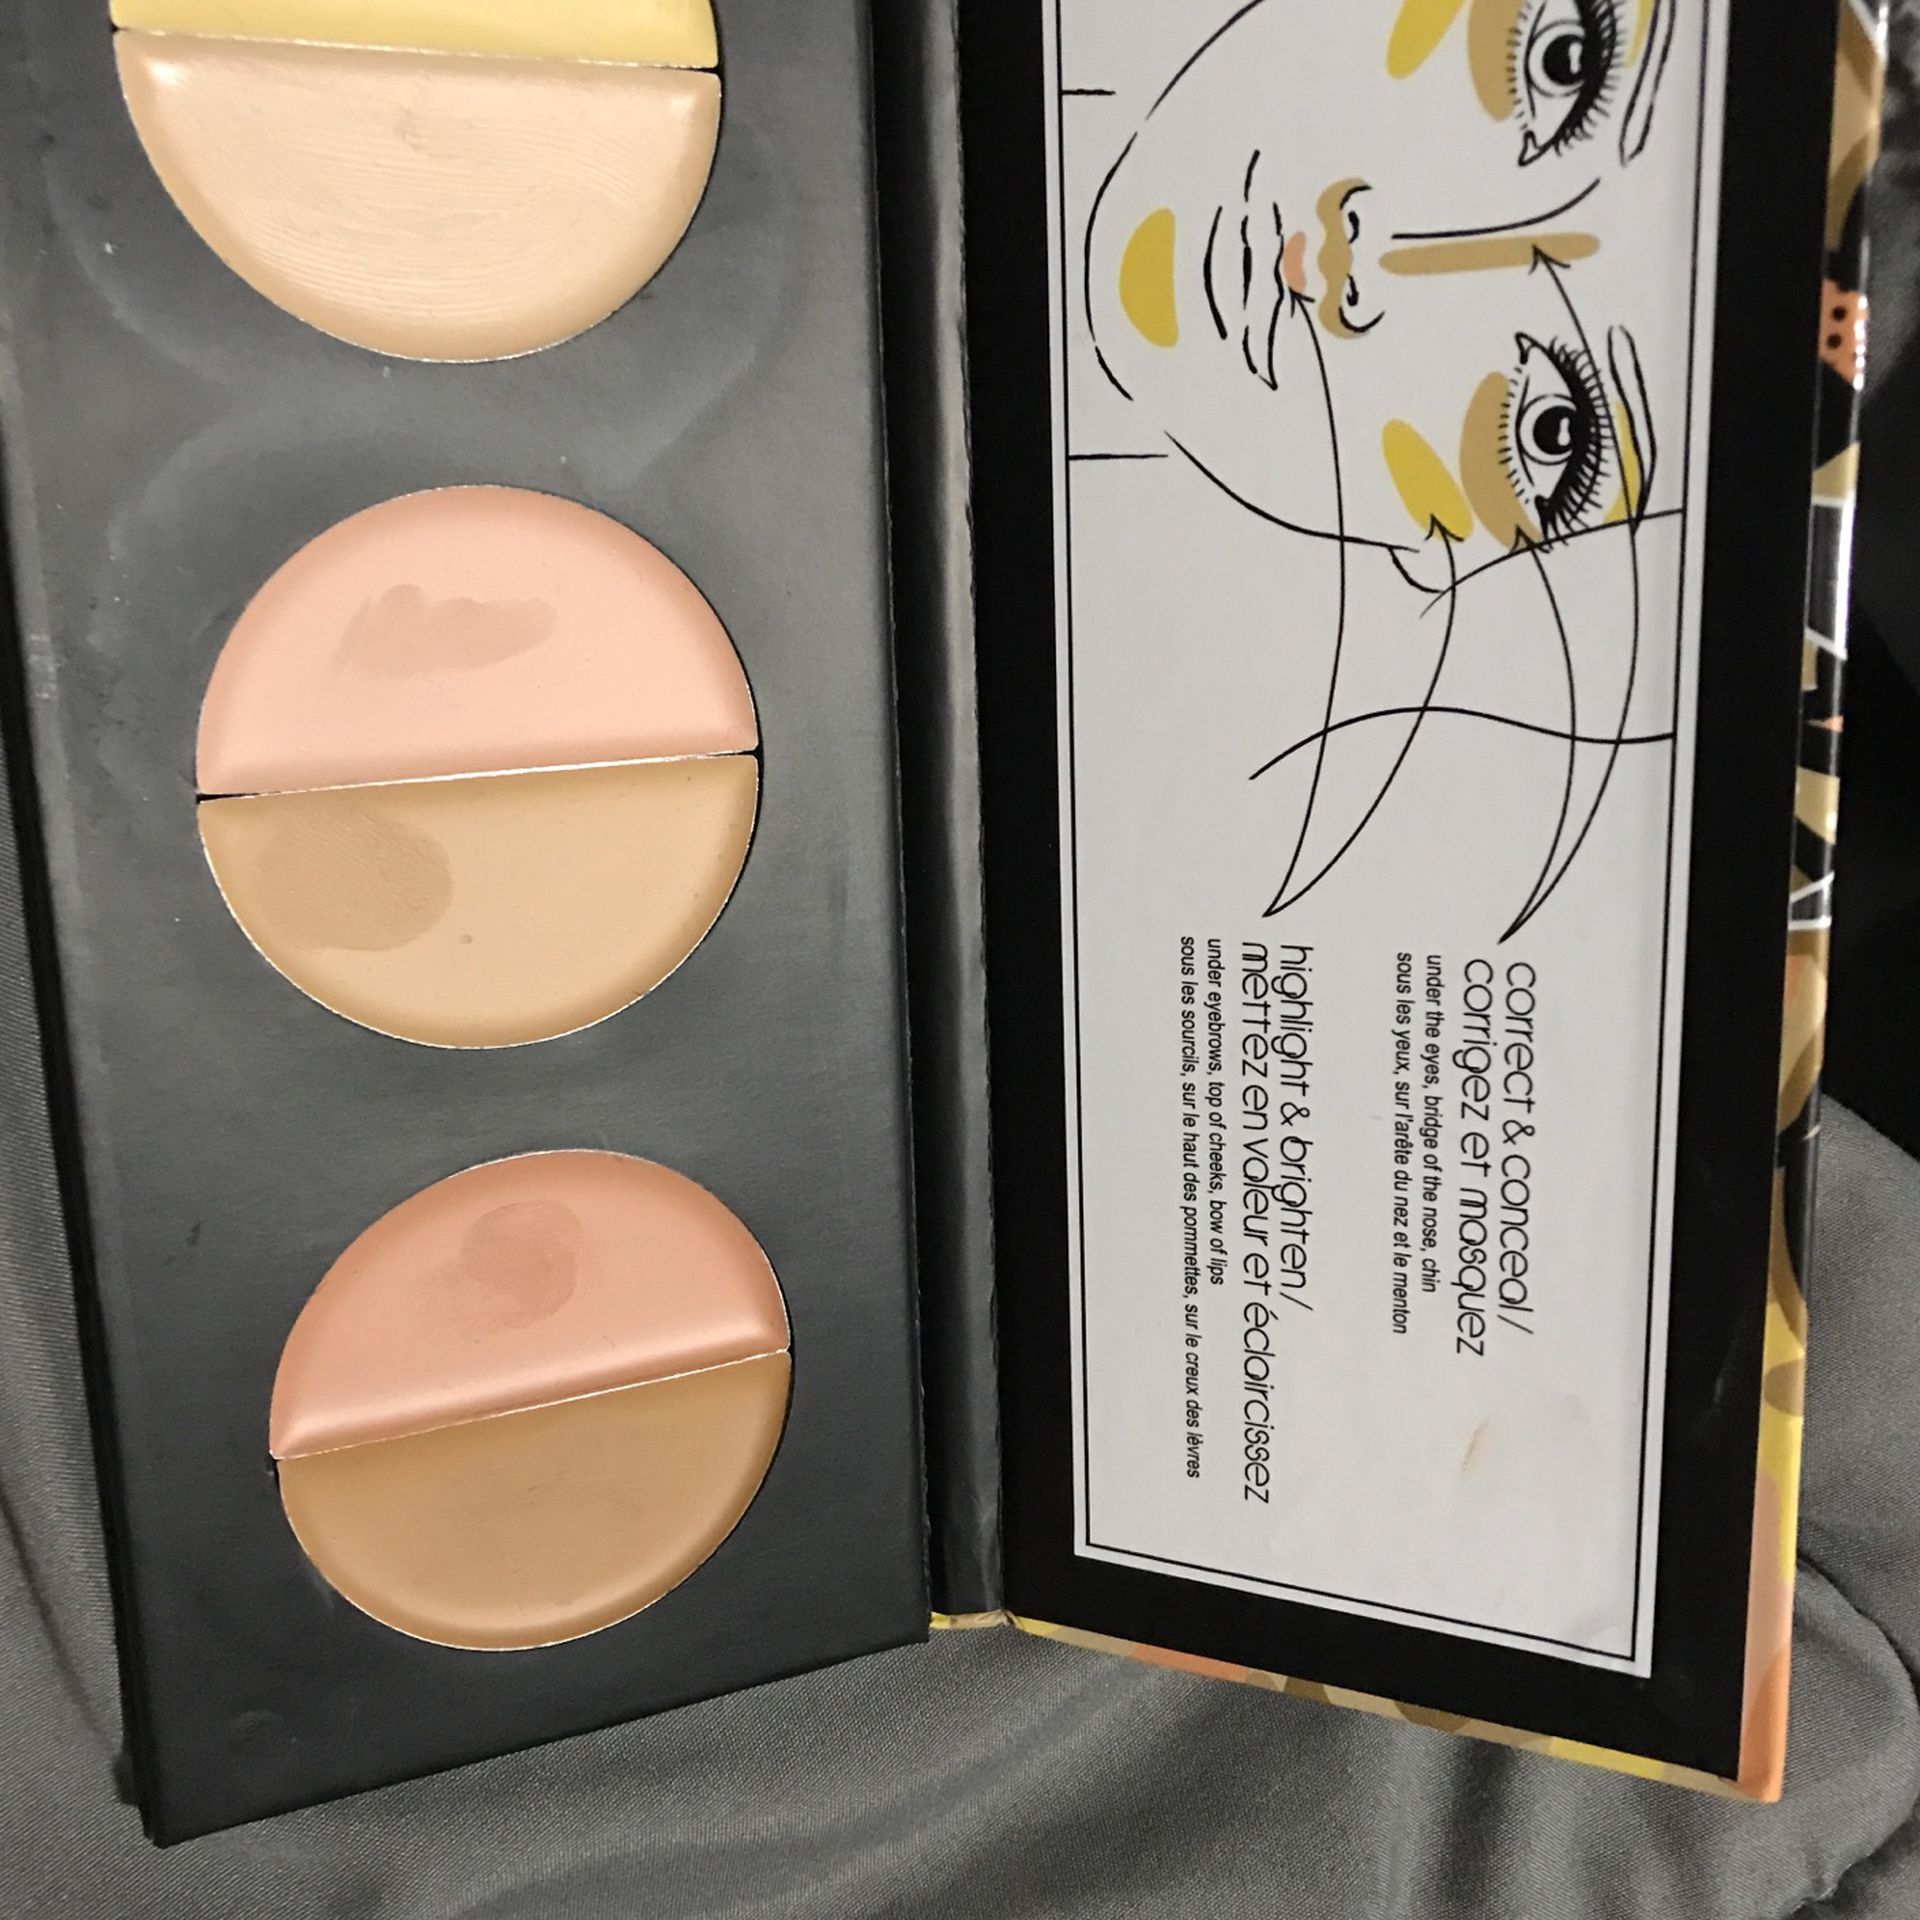 Comou Flag 101 Complexion Corrector Palett for Sale in Oakland, CA - OfferUp